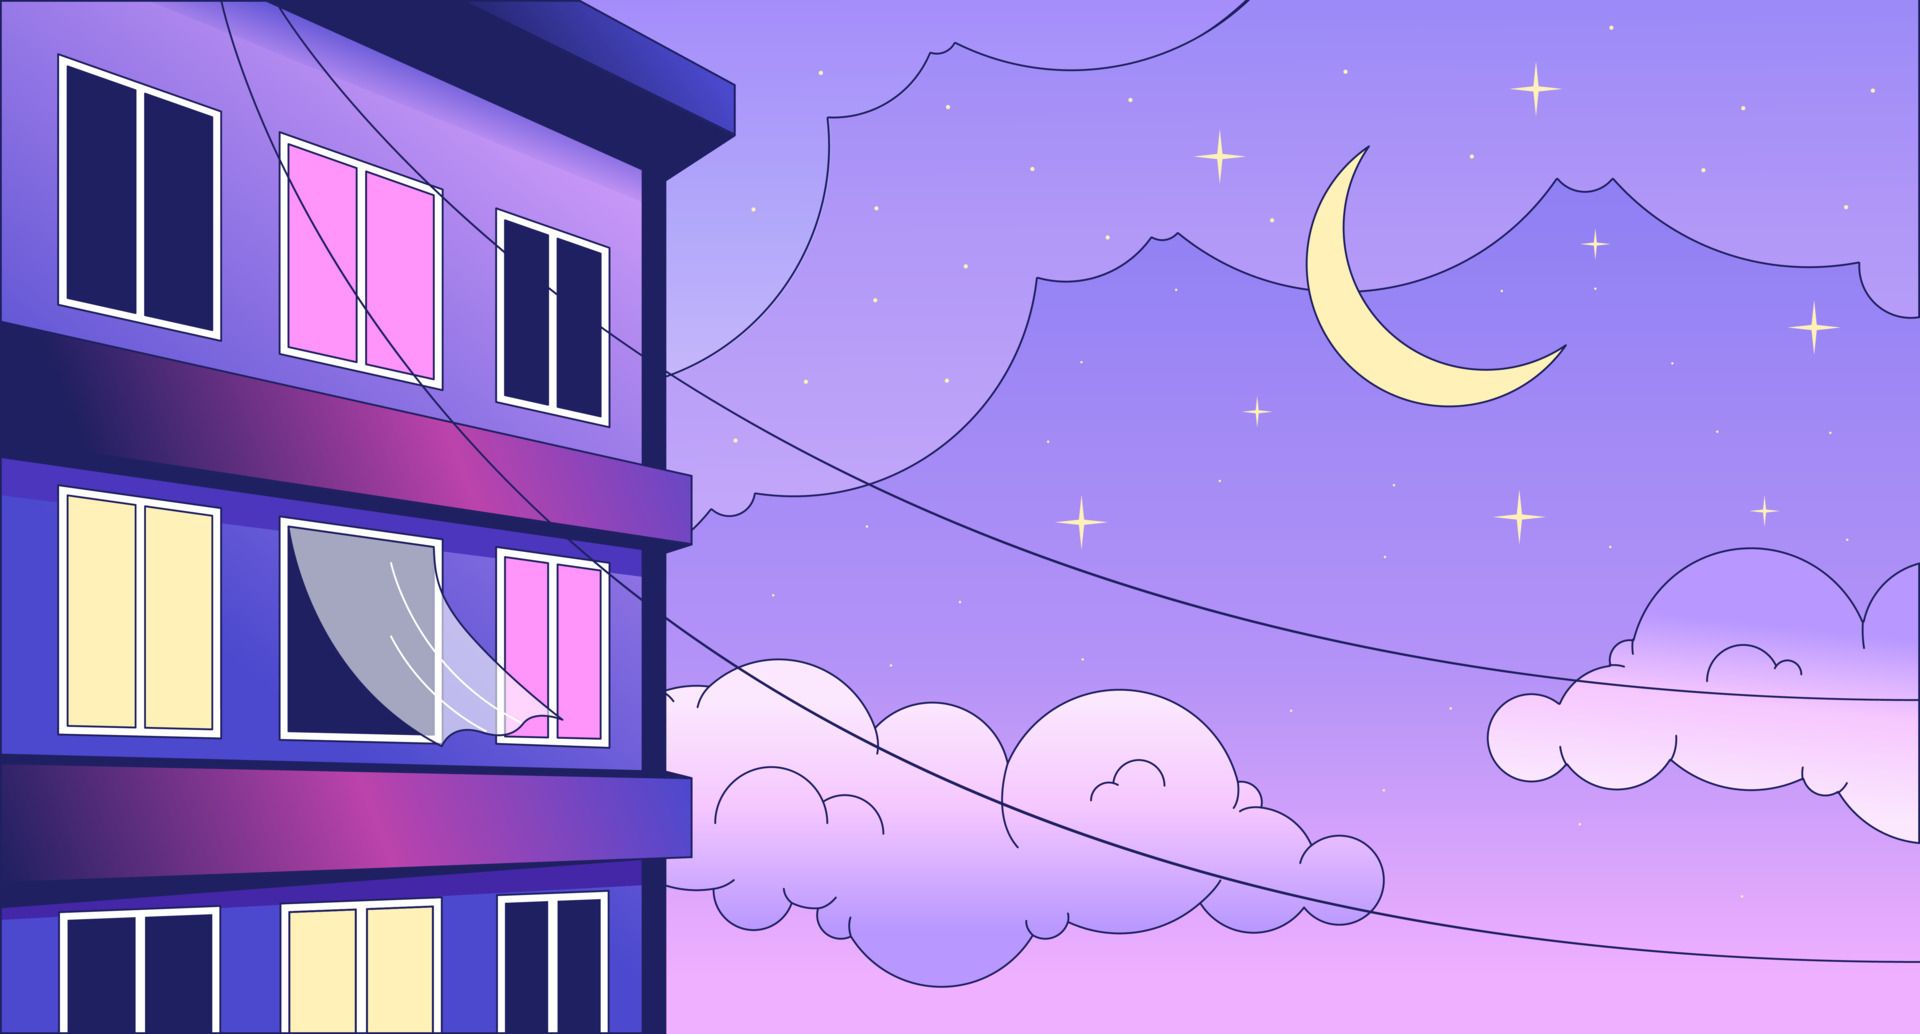 A purple building with pink windows is lit up from the inside. The sky is purple with a crescent moon and stars. - Synthwave, vector, scenery, landscape, Windows 10